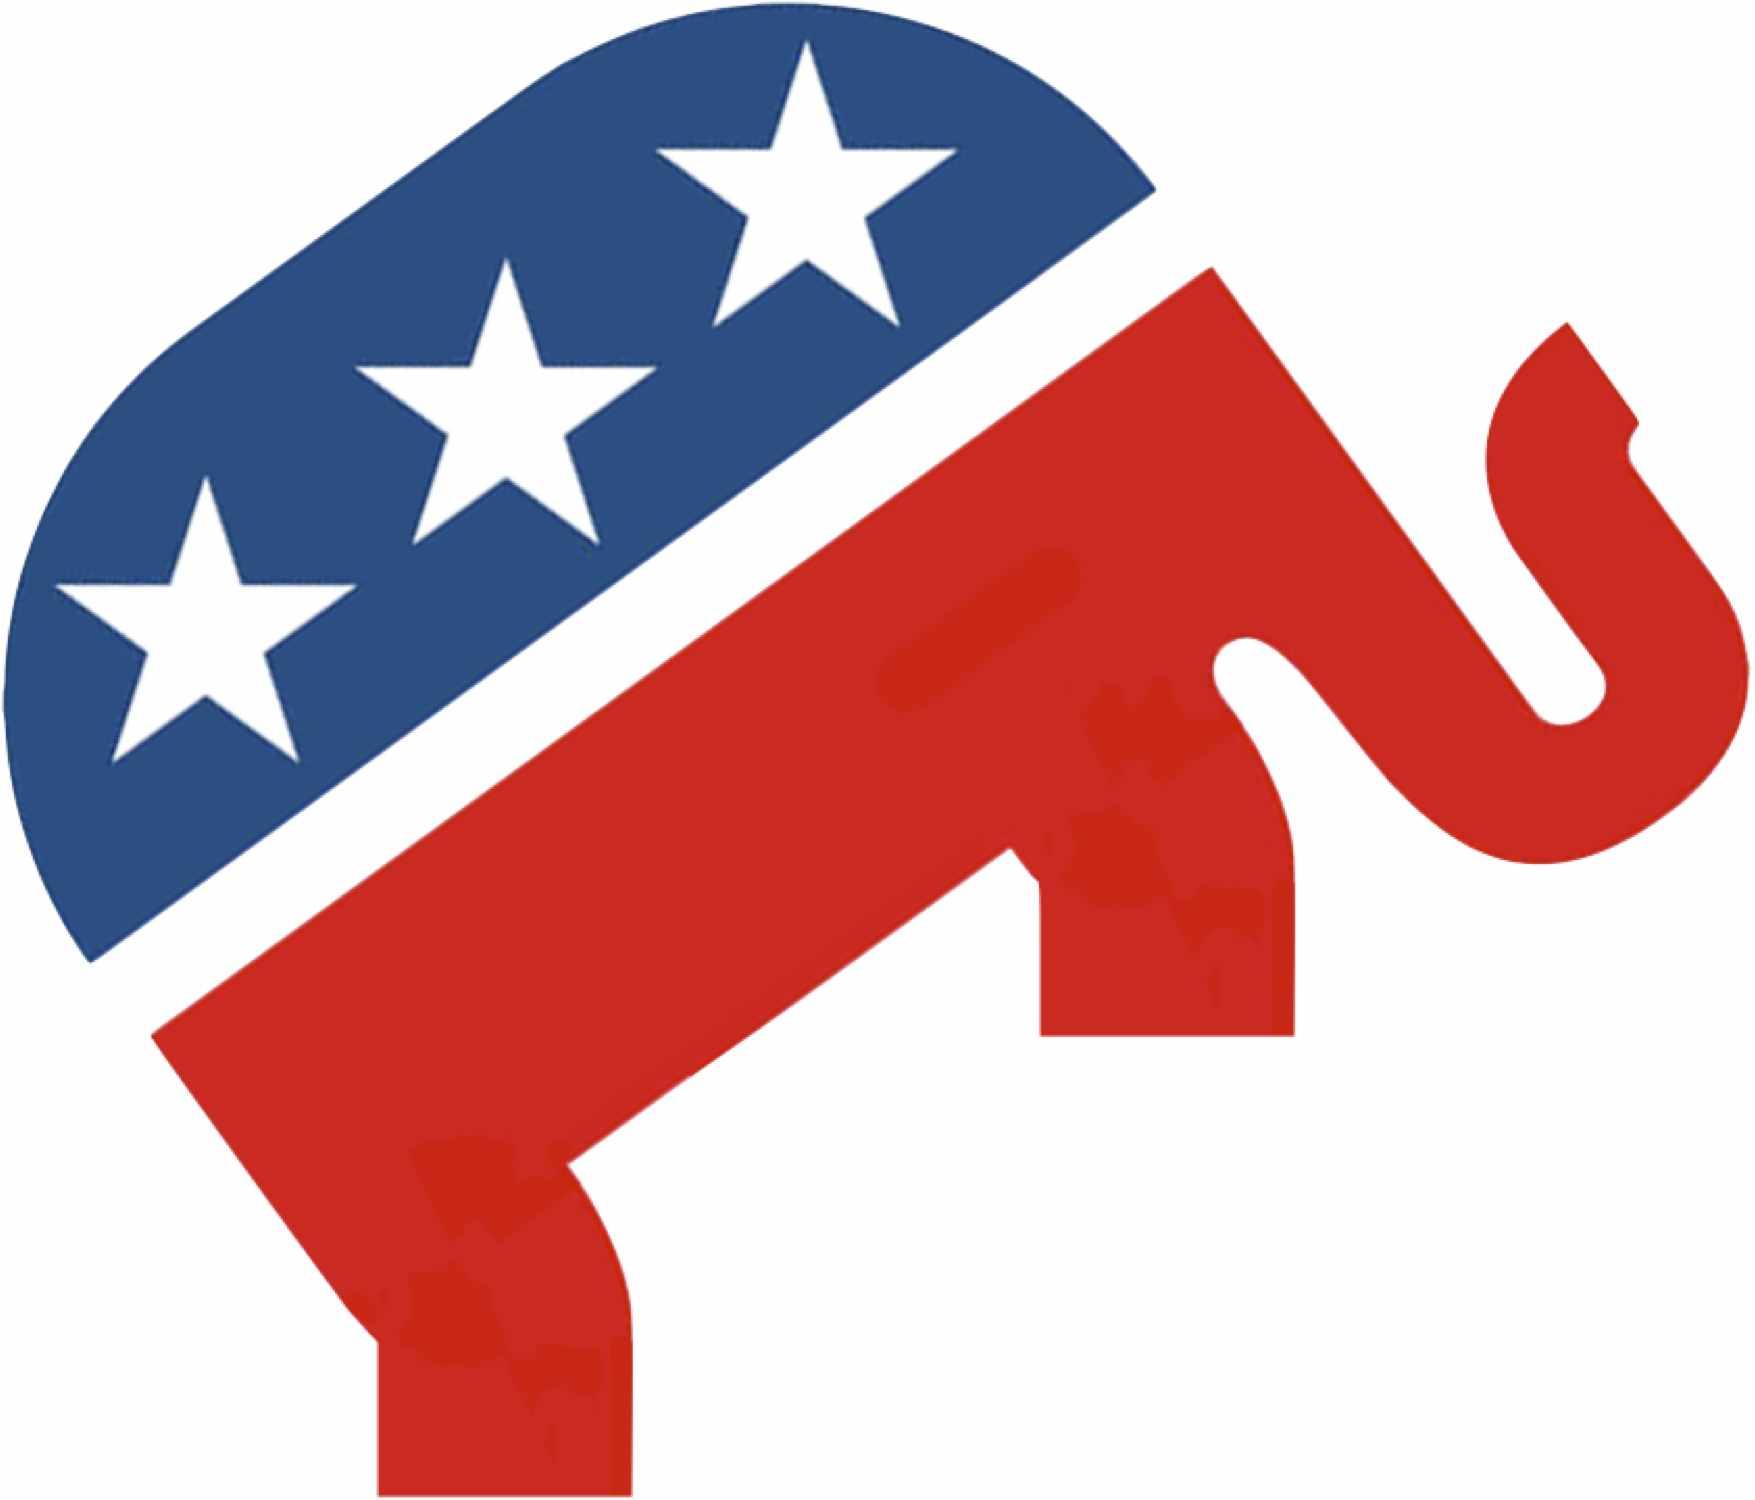 Free Republican Elephant Picture, Download Free Clip Art